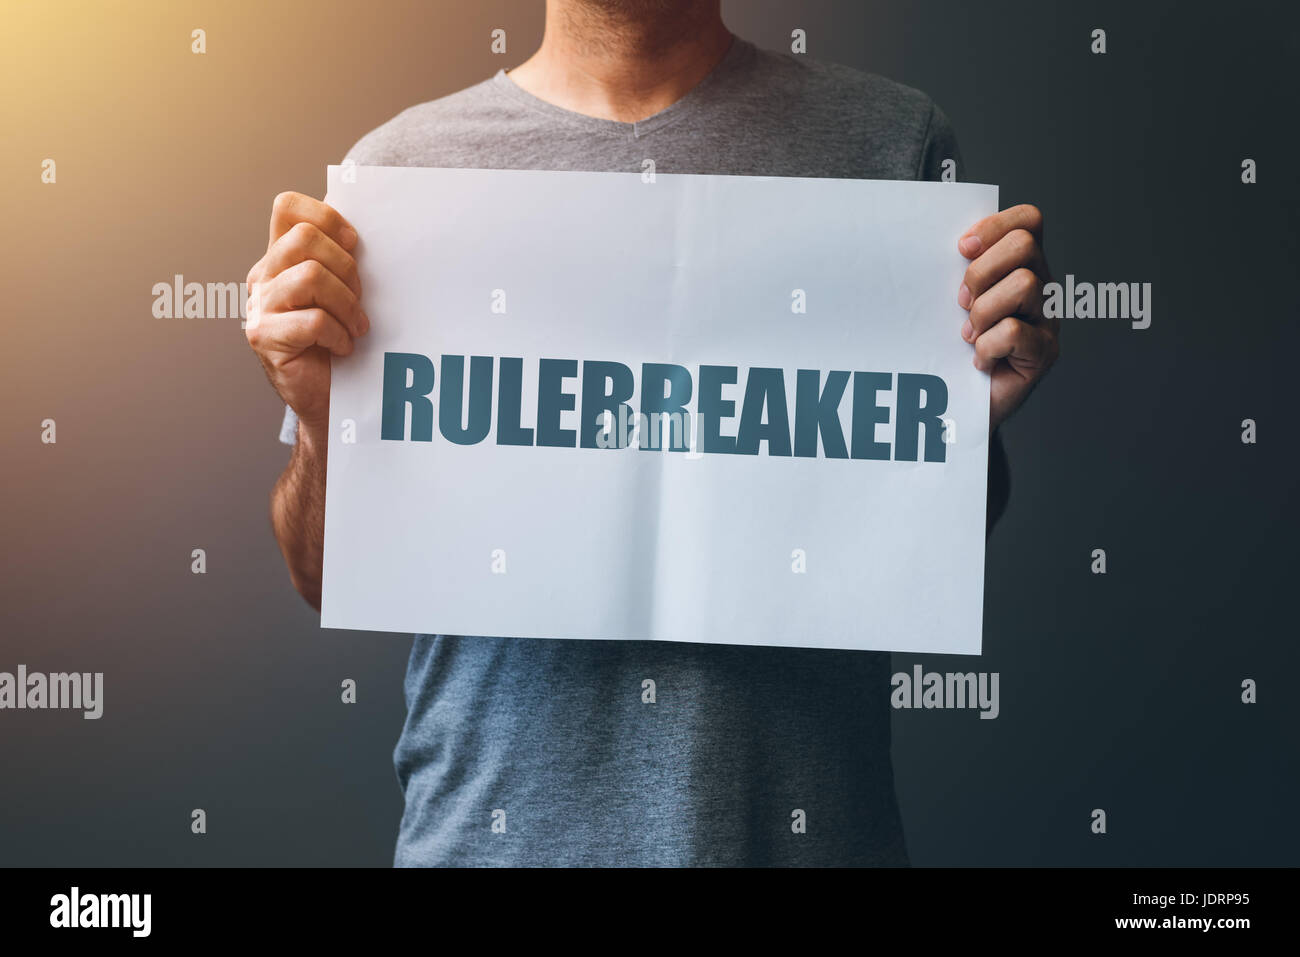 Rulebreaker attitude, person who breakes the rules concept with male holding poster Stock Photo